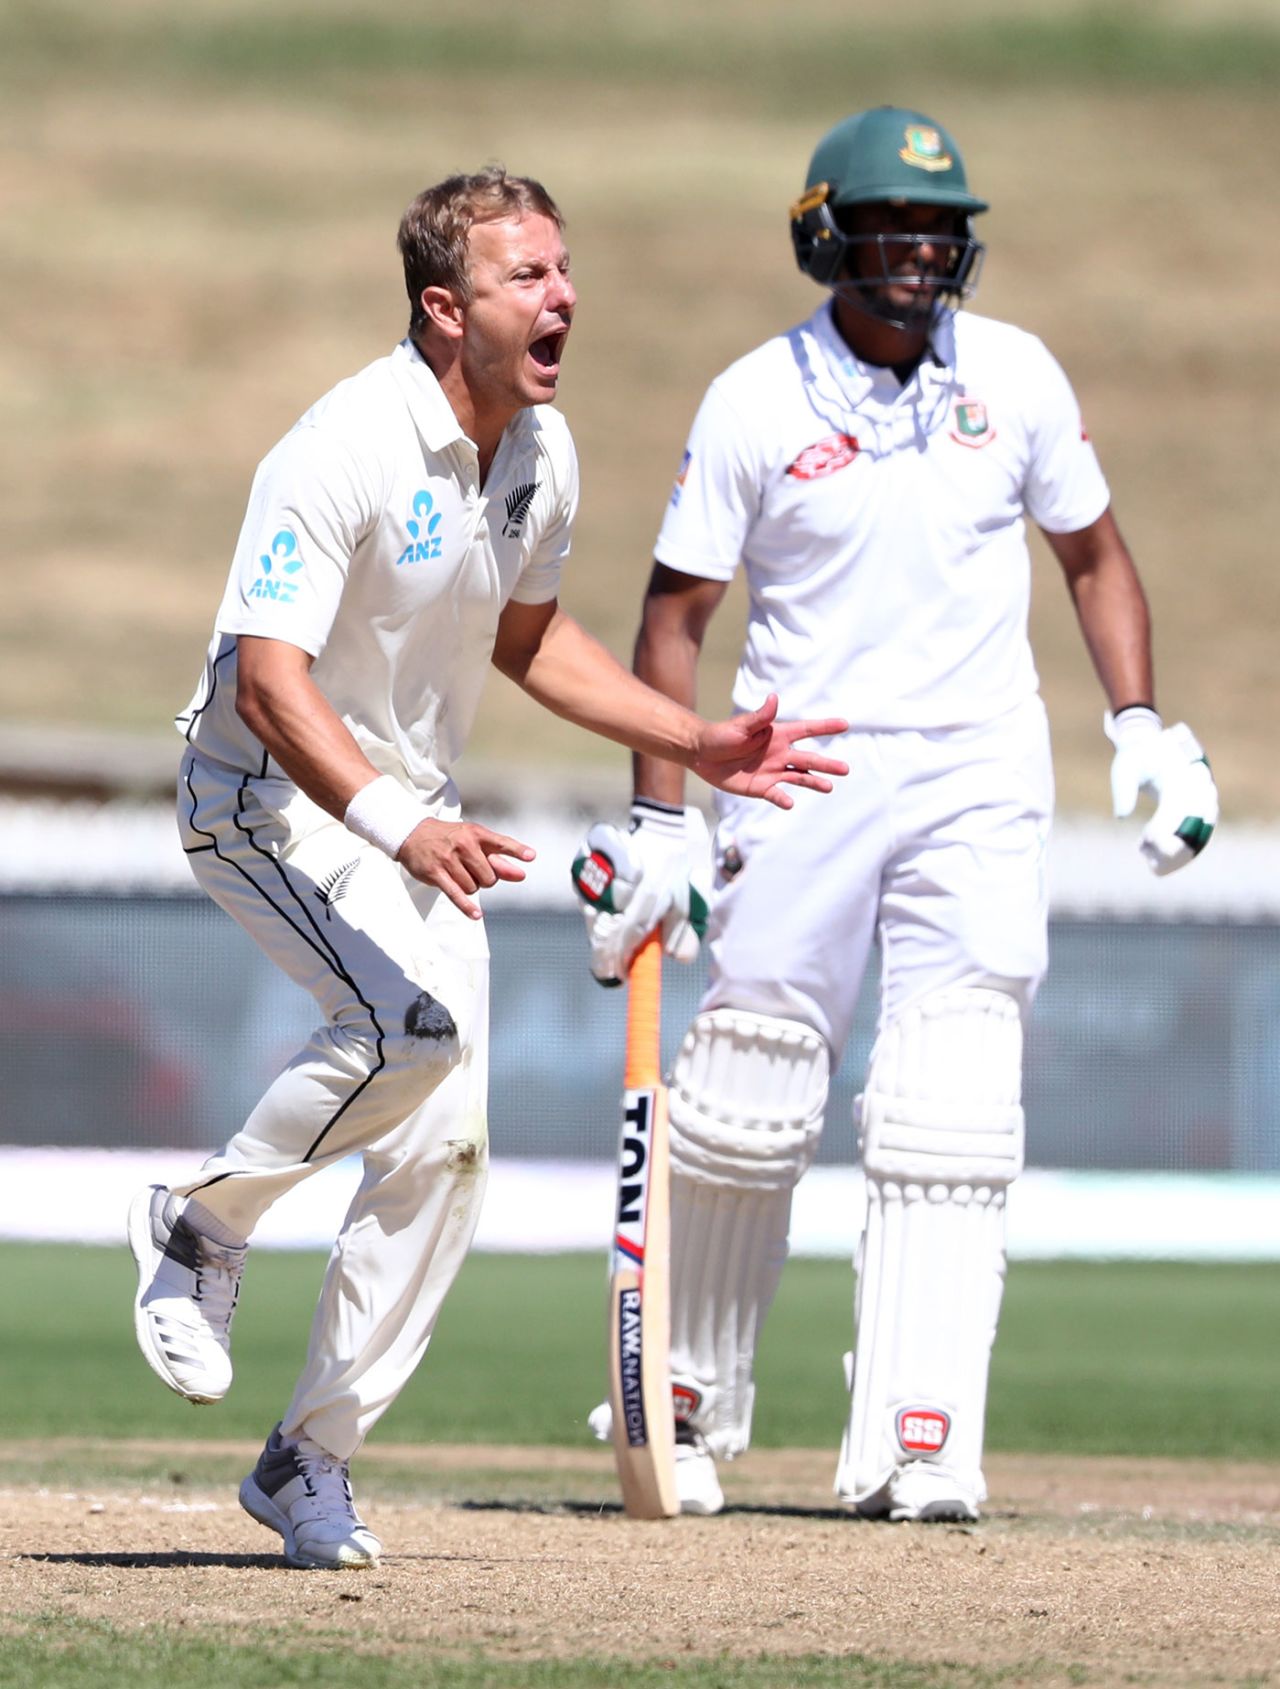 Neil Wagner shows his emotions, New Zealand v Bangladesh, 1st Test, Hamilton, 4th day, March 3, 2019